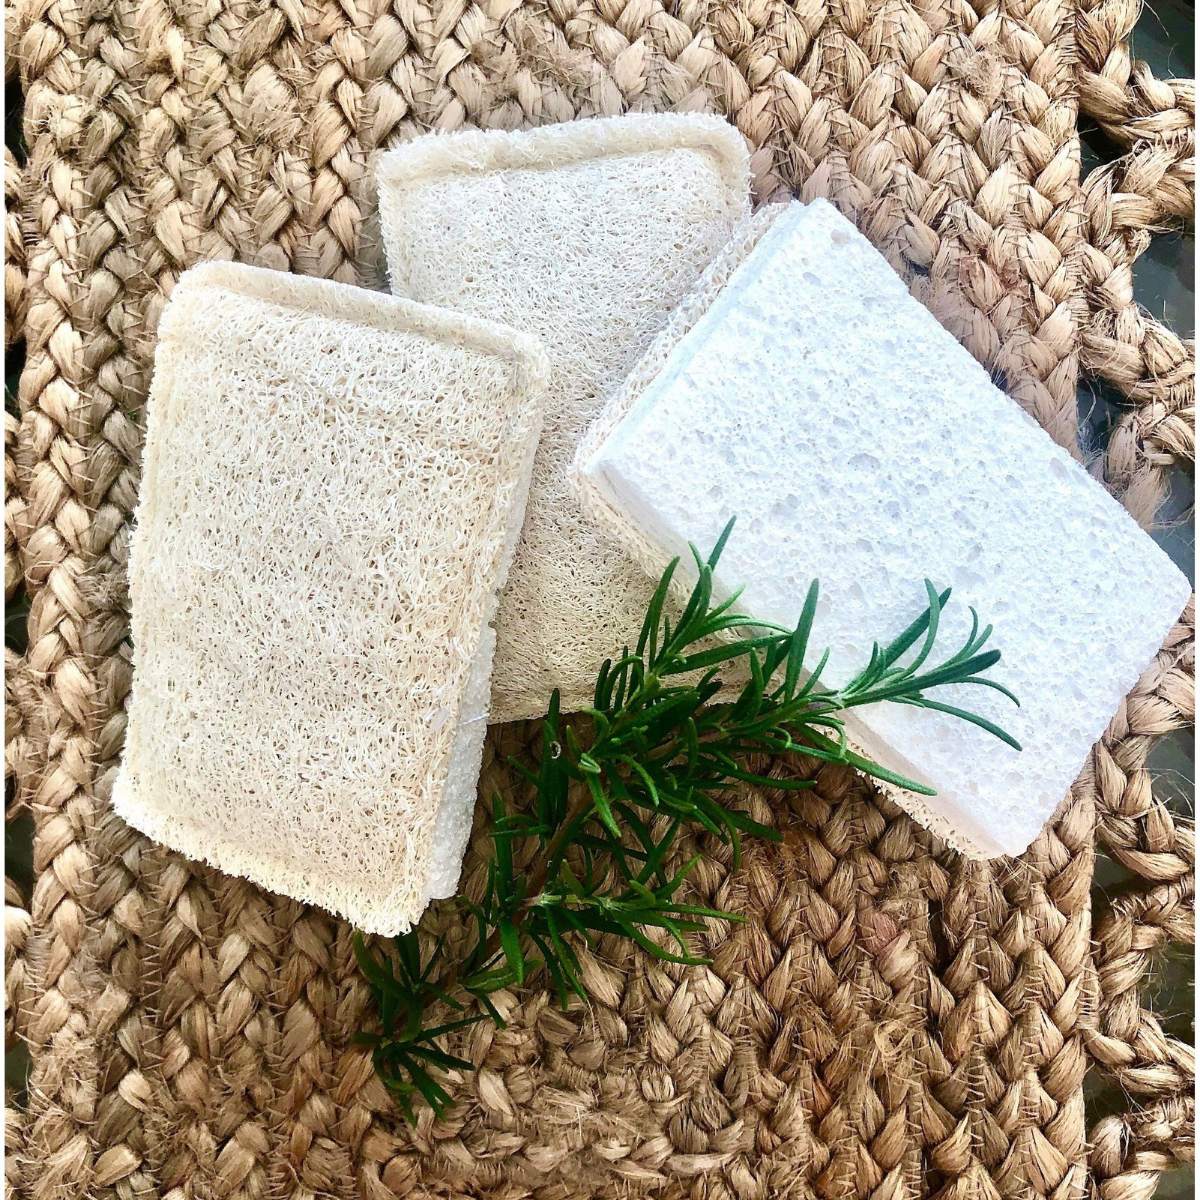 Eco Double-Sided Sponge - SET OF 2 with hanging String - Sisal & Coconut Scourer w/ cellulose sponge